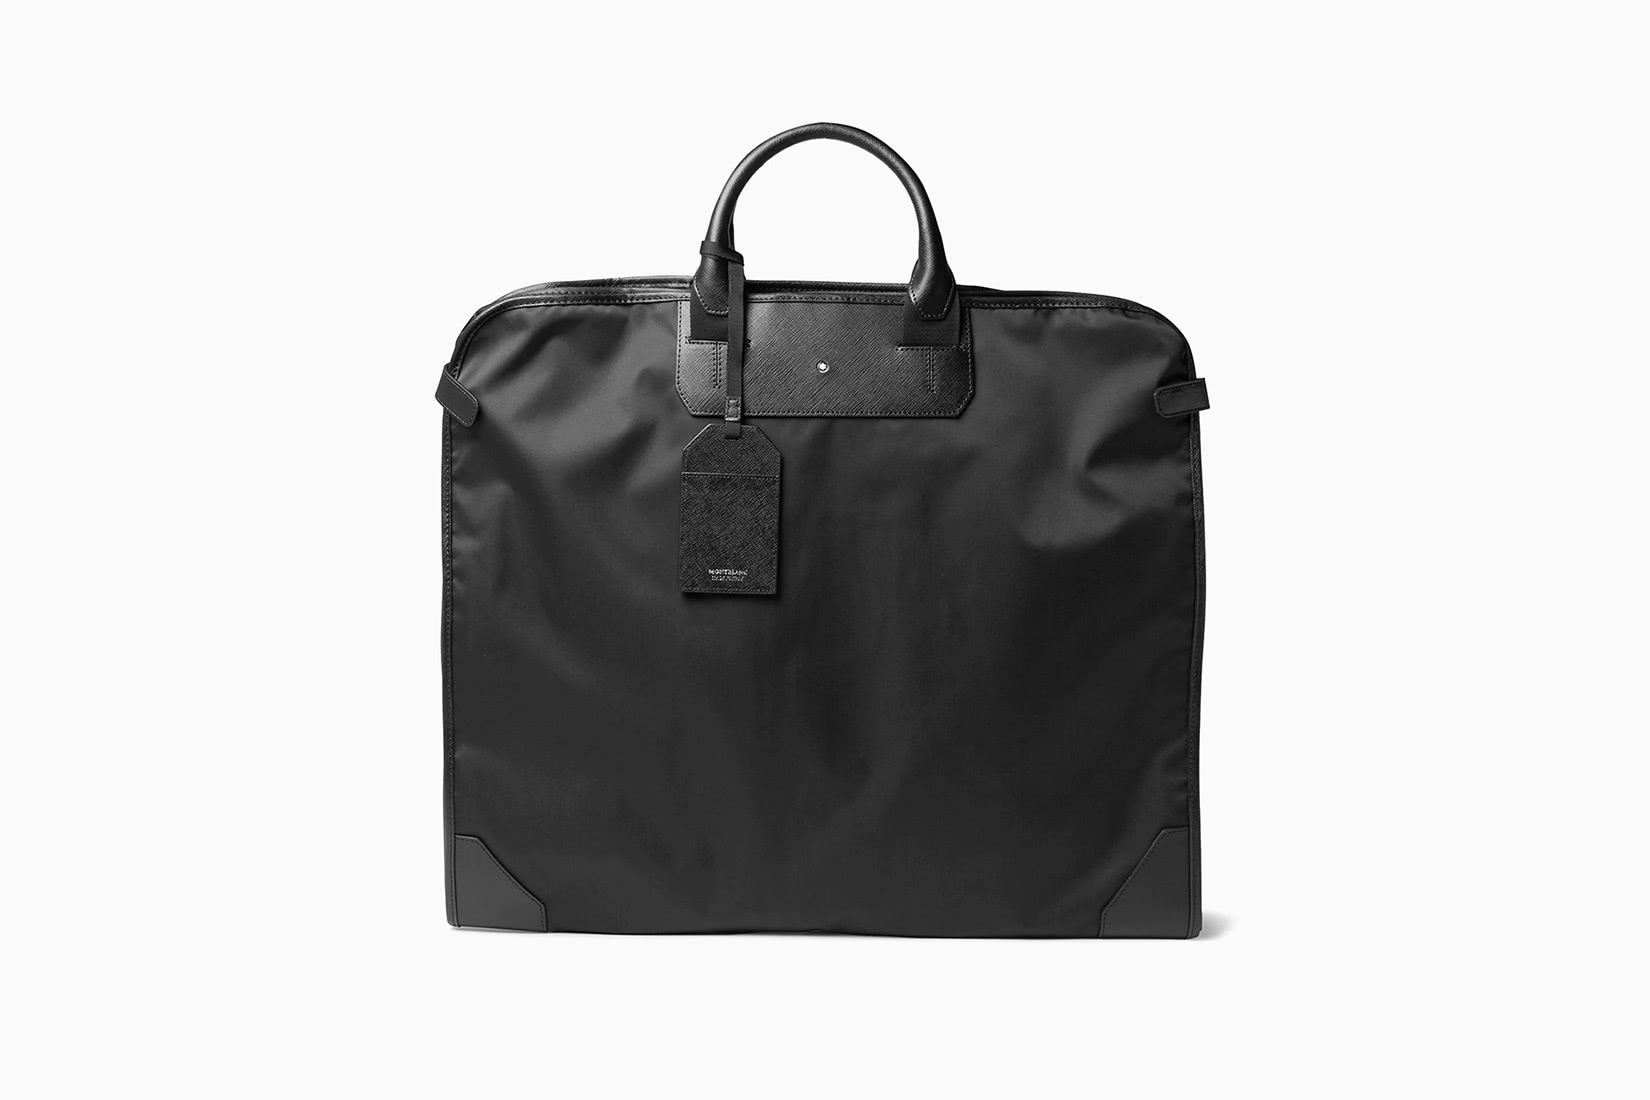 FOREGOER Carry On Garment Bag for Travel Business Suit Carriers Covers Bag For Men Women 